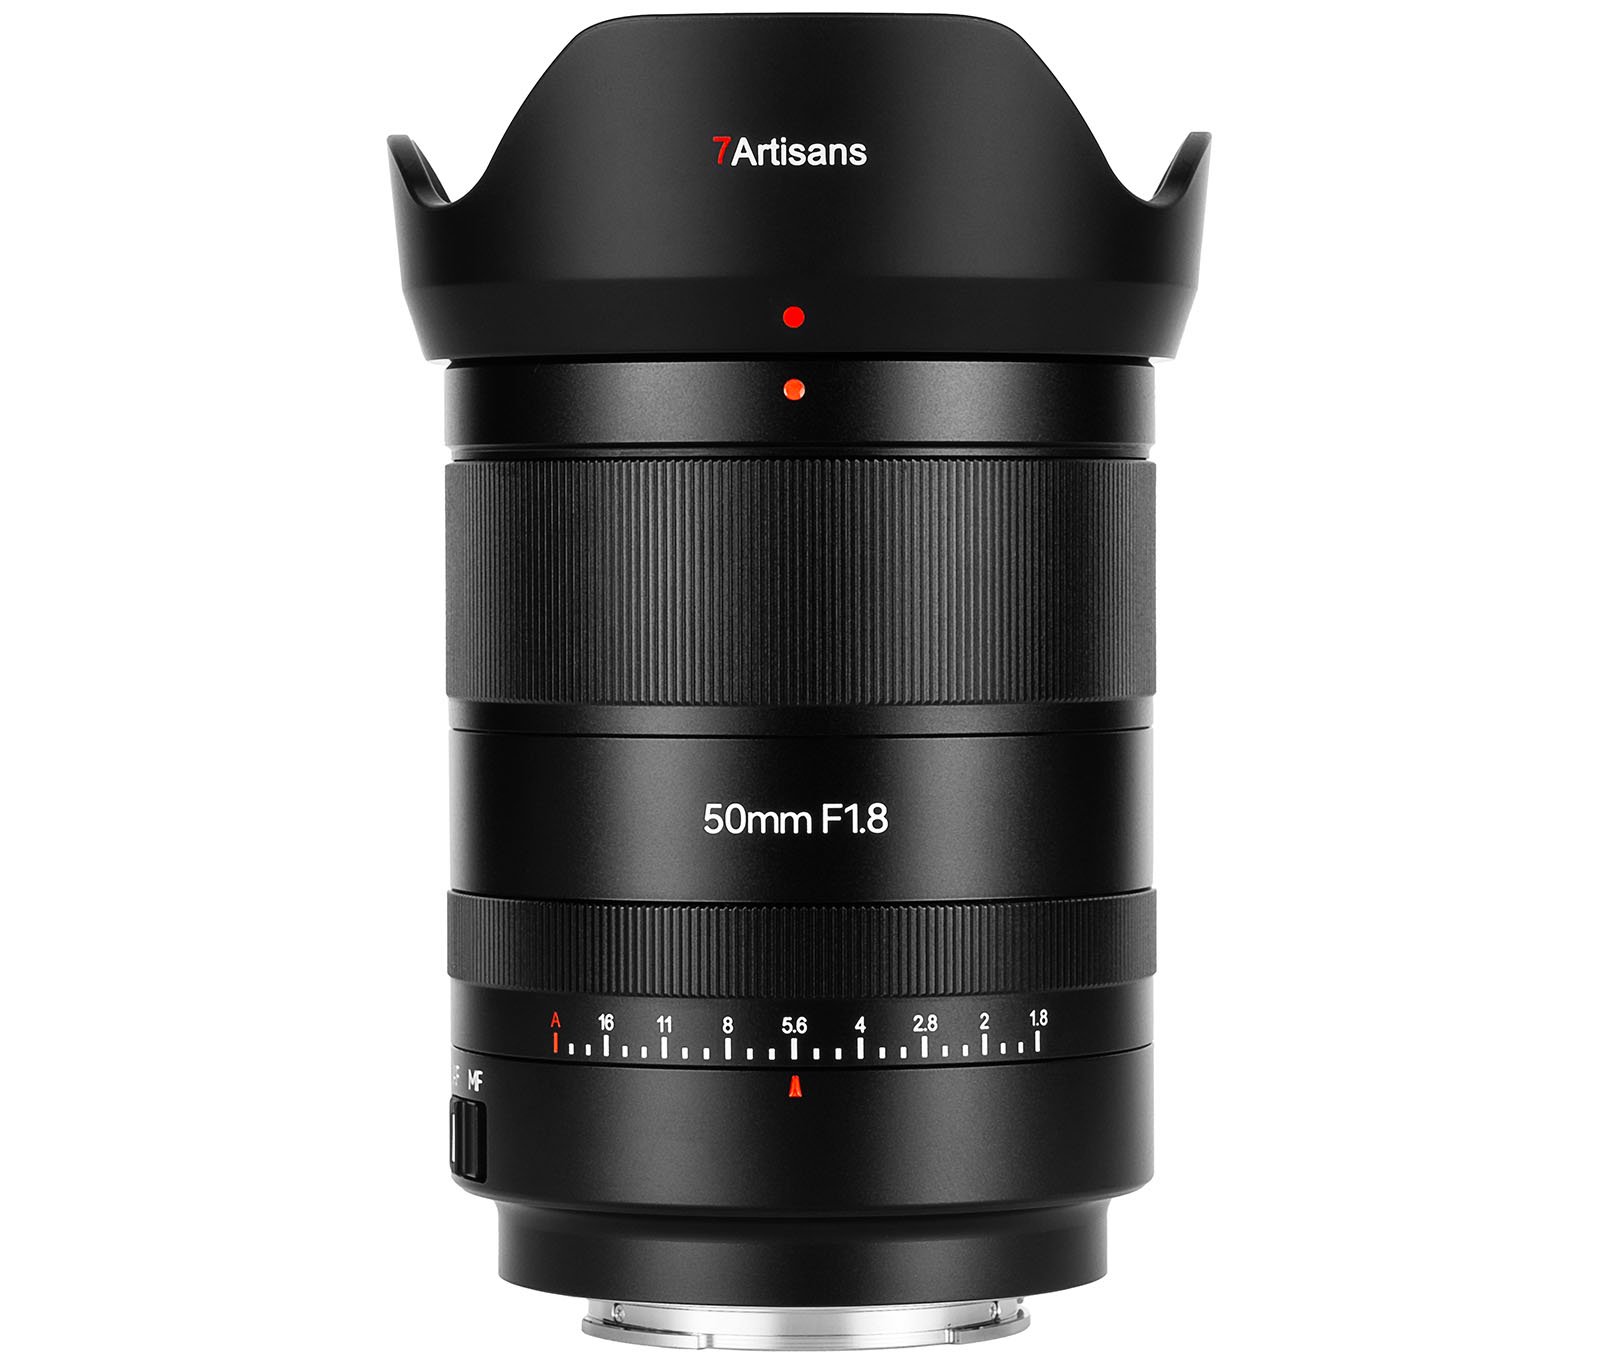 A 7artisans 50mm f1.8 lens for cameras, shown from the front with a focus on its details and settings, featuring a black body and a large hood.